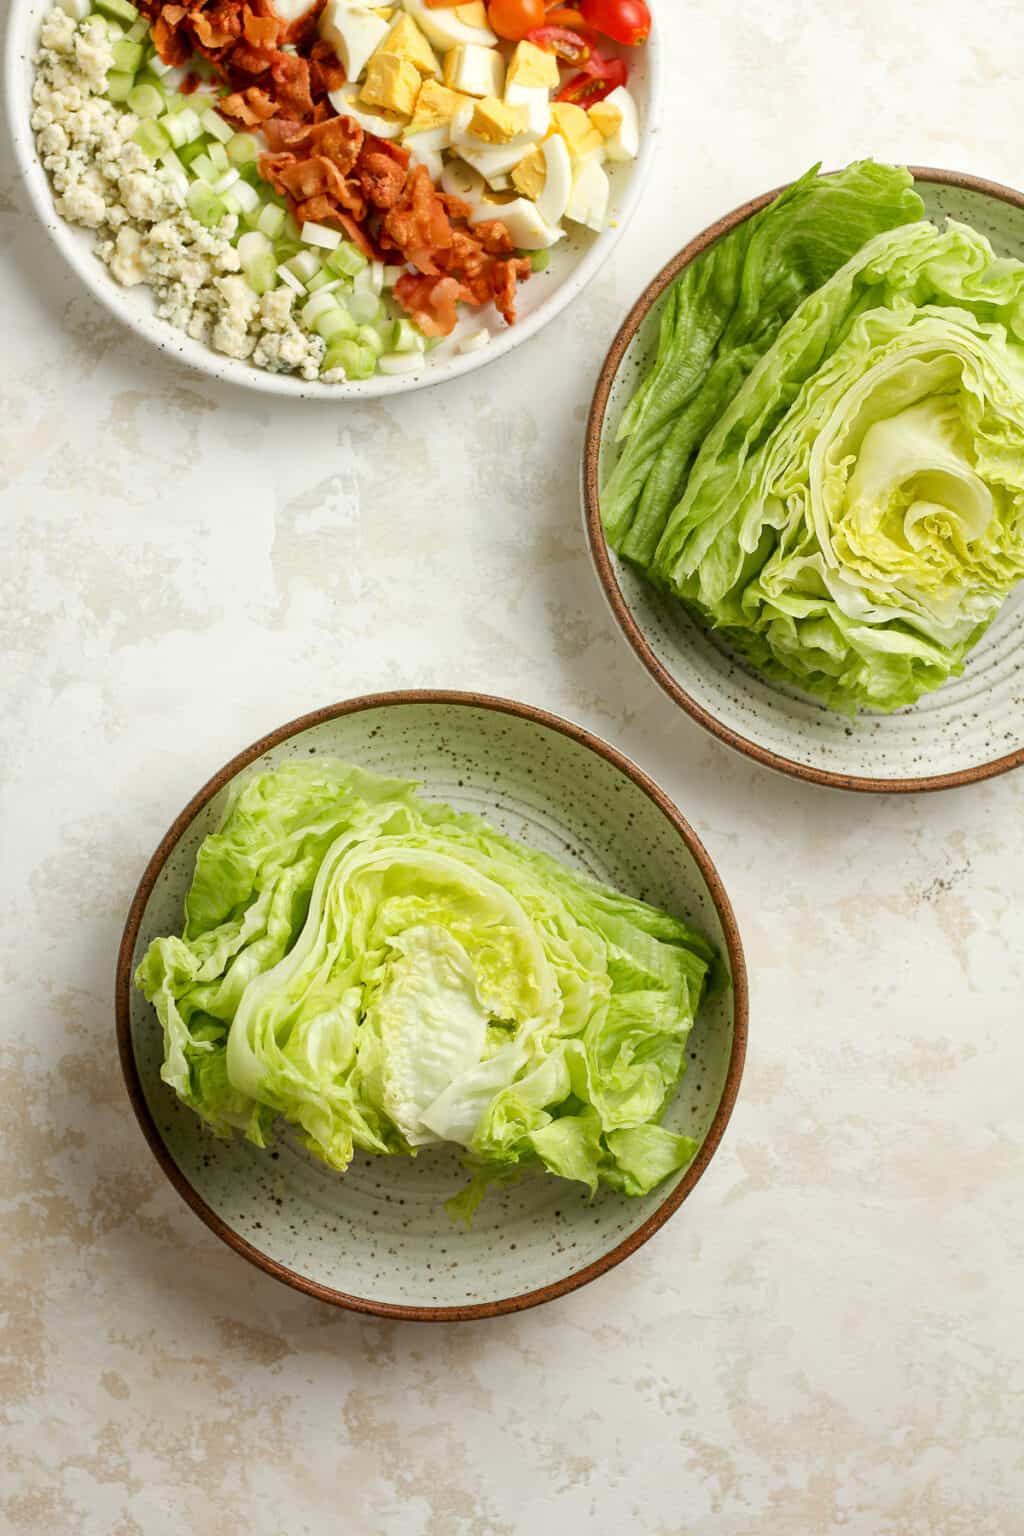 Classic Wedge Salad with Blue Cheese Dressing - SueBee Homemaker